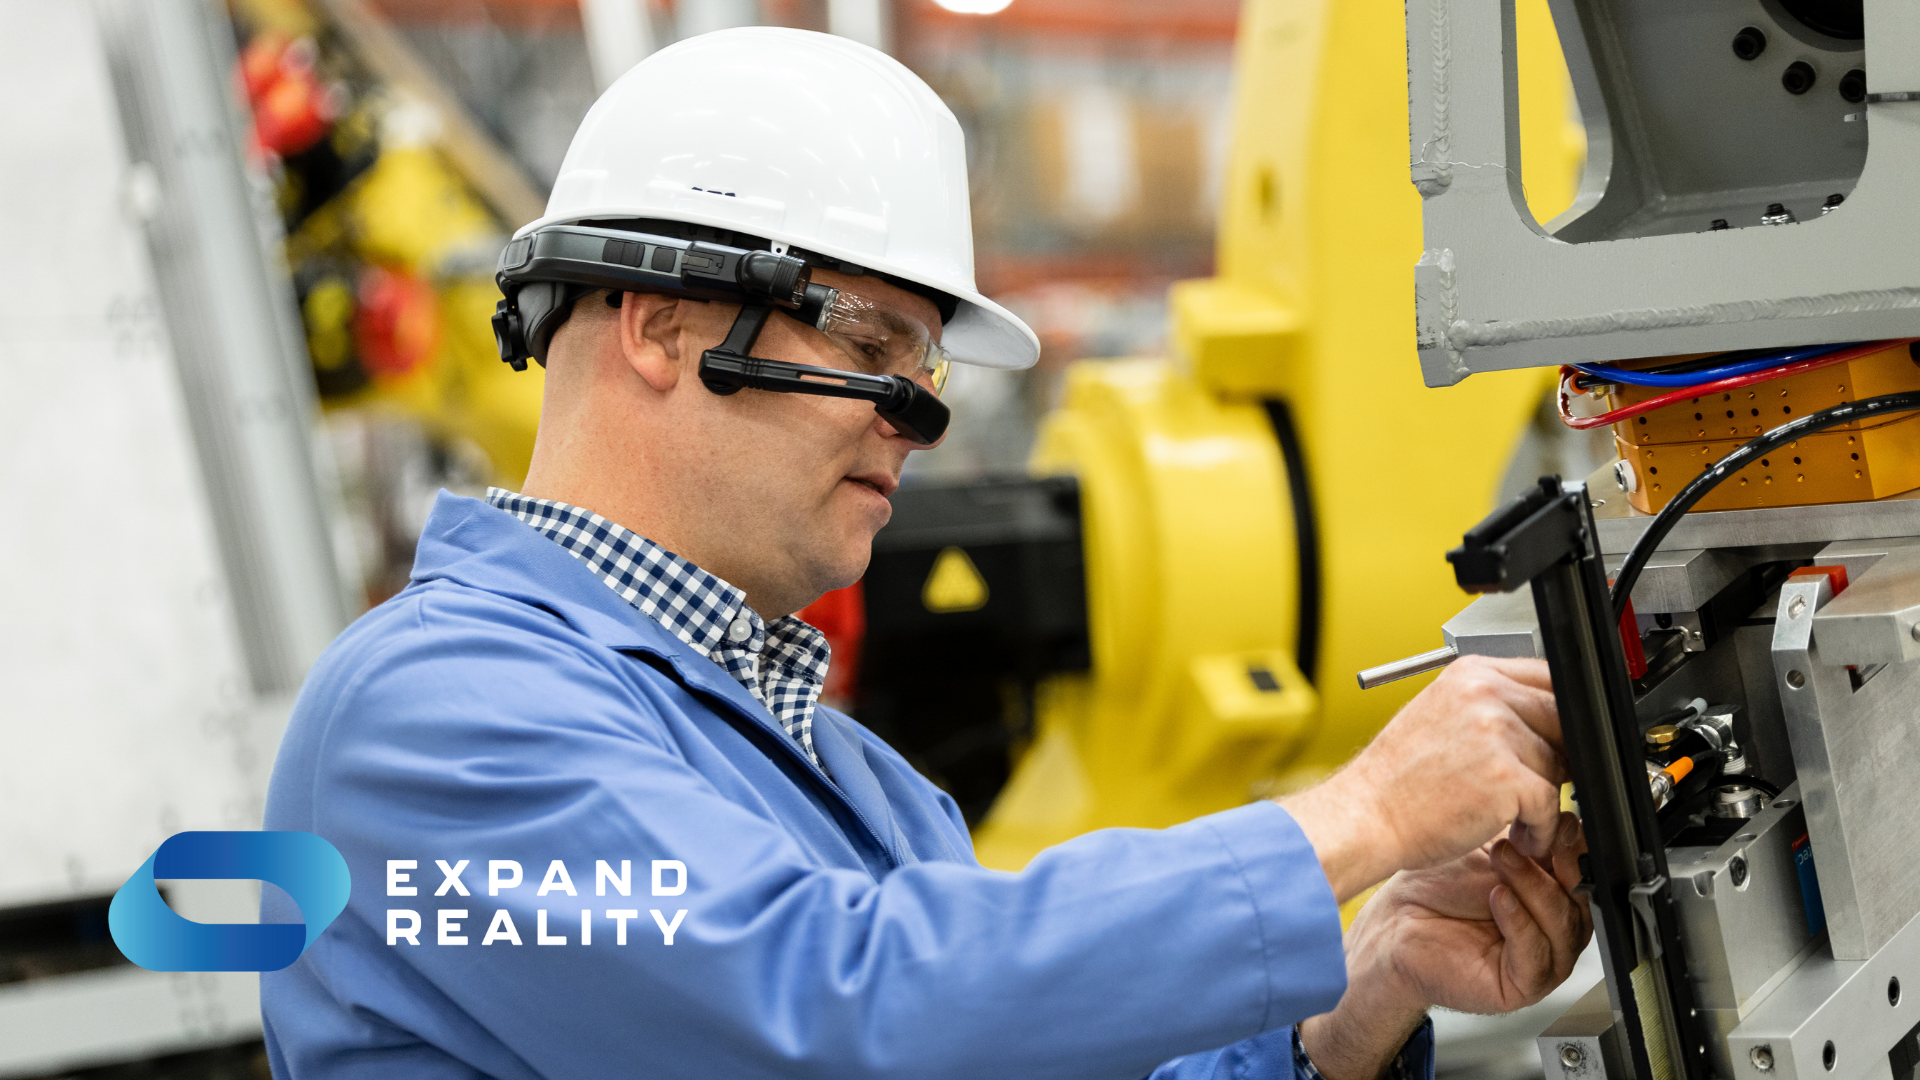 Interested in XR glasses, but not sure they'll work with PPE? Bookmark this page. We've dug deep to find answers for many of the most popular devices.